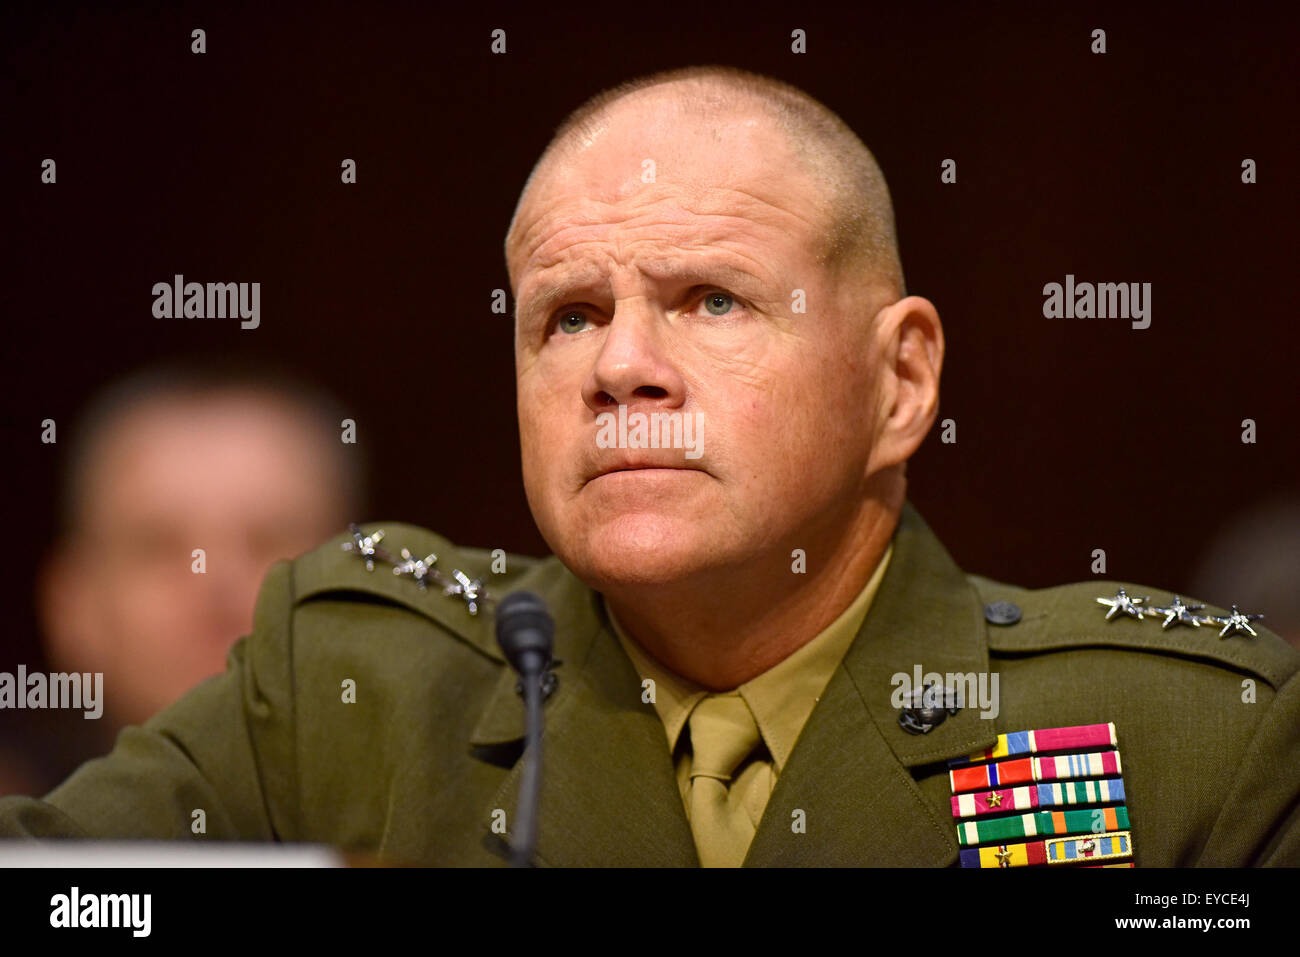 Lieutenant General Robert B. Neller, USMC appears before the United States Senate Committee on Armed Services considering his nomination as General and Commandant of the US Marine Corps on Capitol Hill in Washington, DC on Thursday, July 23, 2015. Credit: Ron Sachs/CNP - NO WIRE SERVICE - Stock Photo